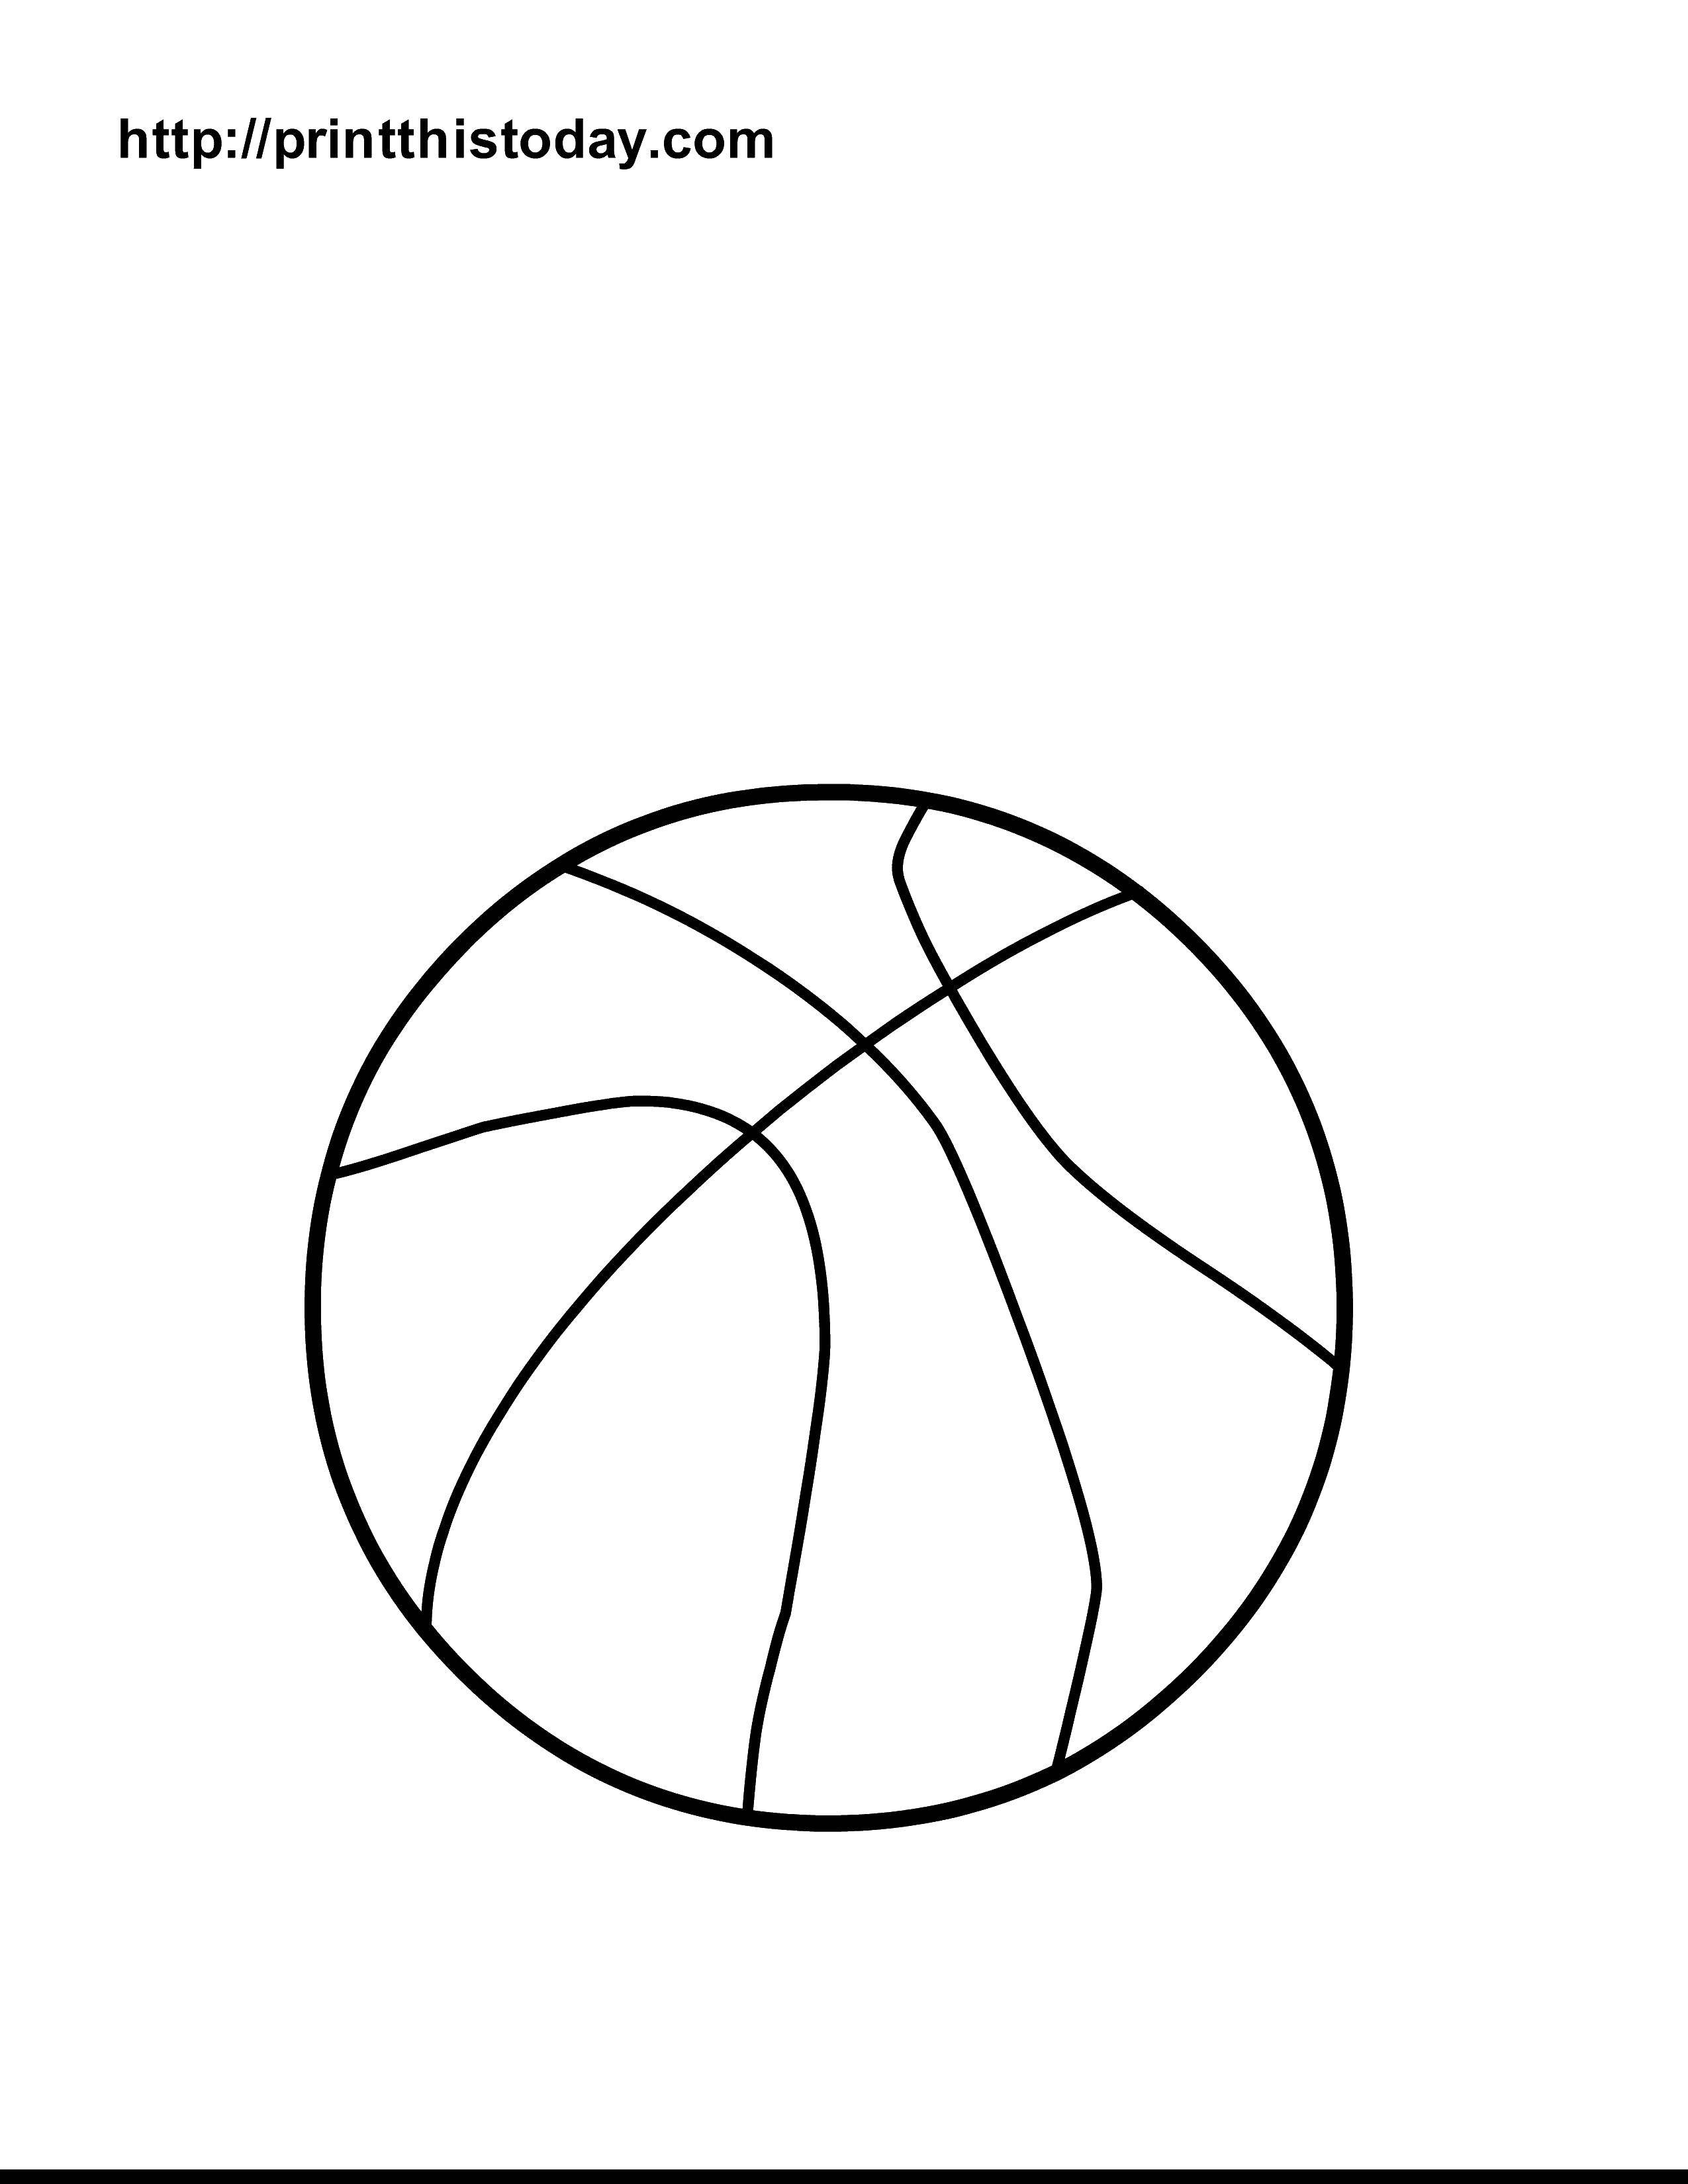 Coloring The outline of a basketball. Category Sports. Tags:  outline , ball, basketball.